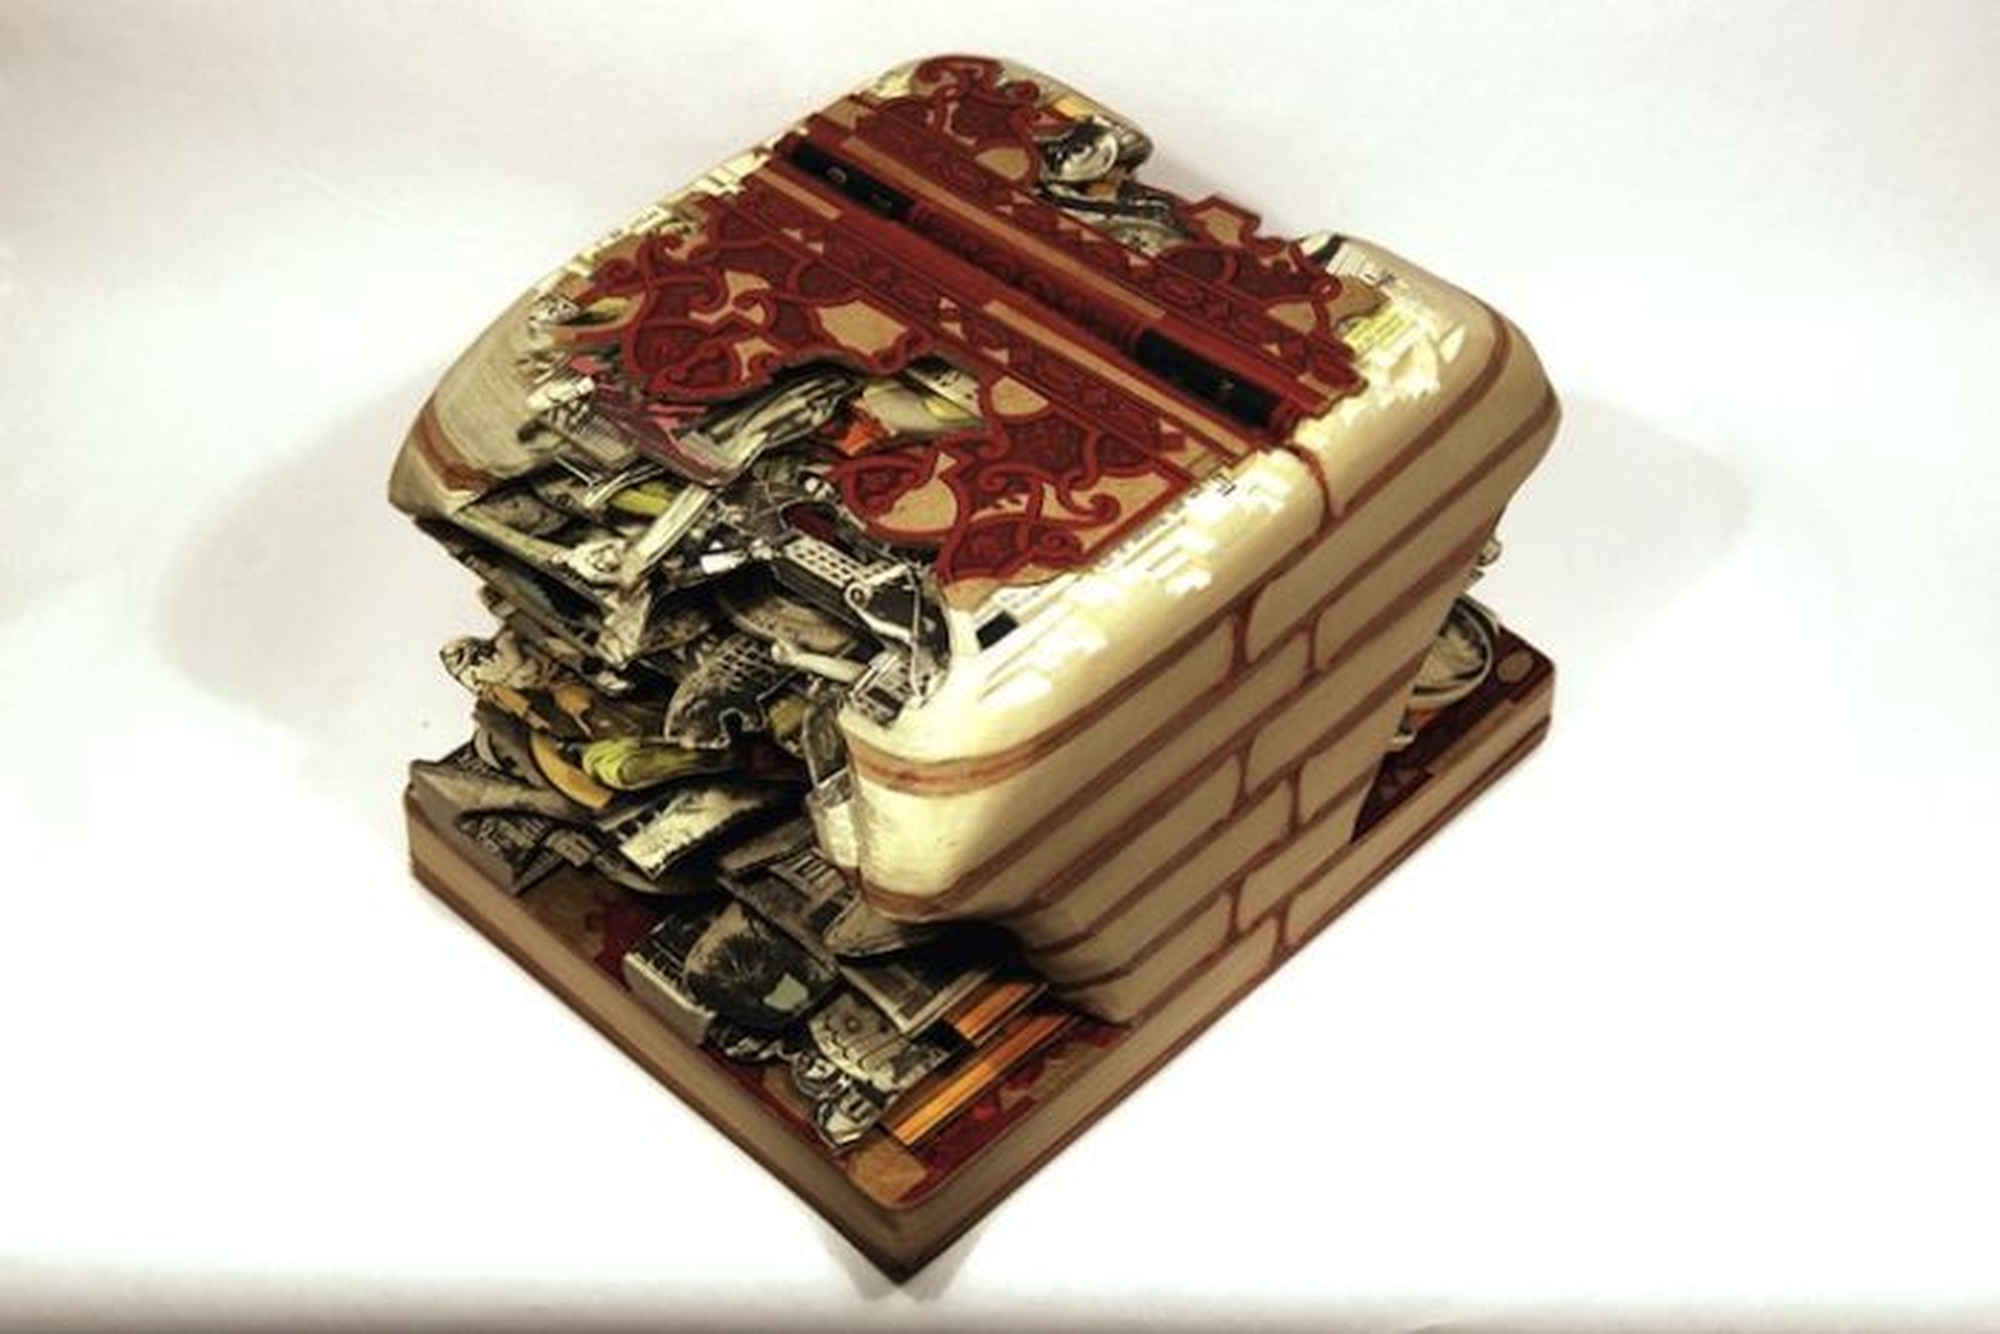 Unusual Book Art That Will Blow Your Brain.